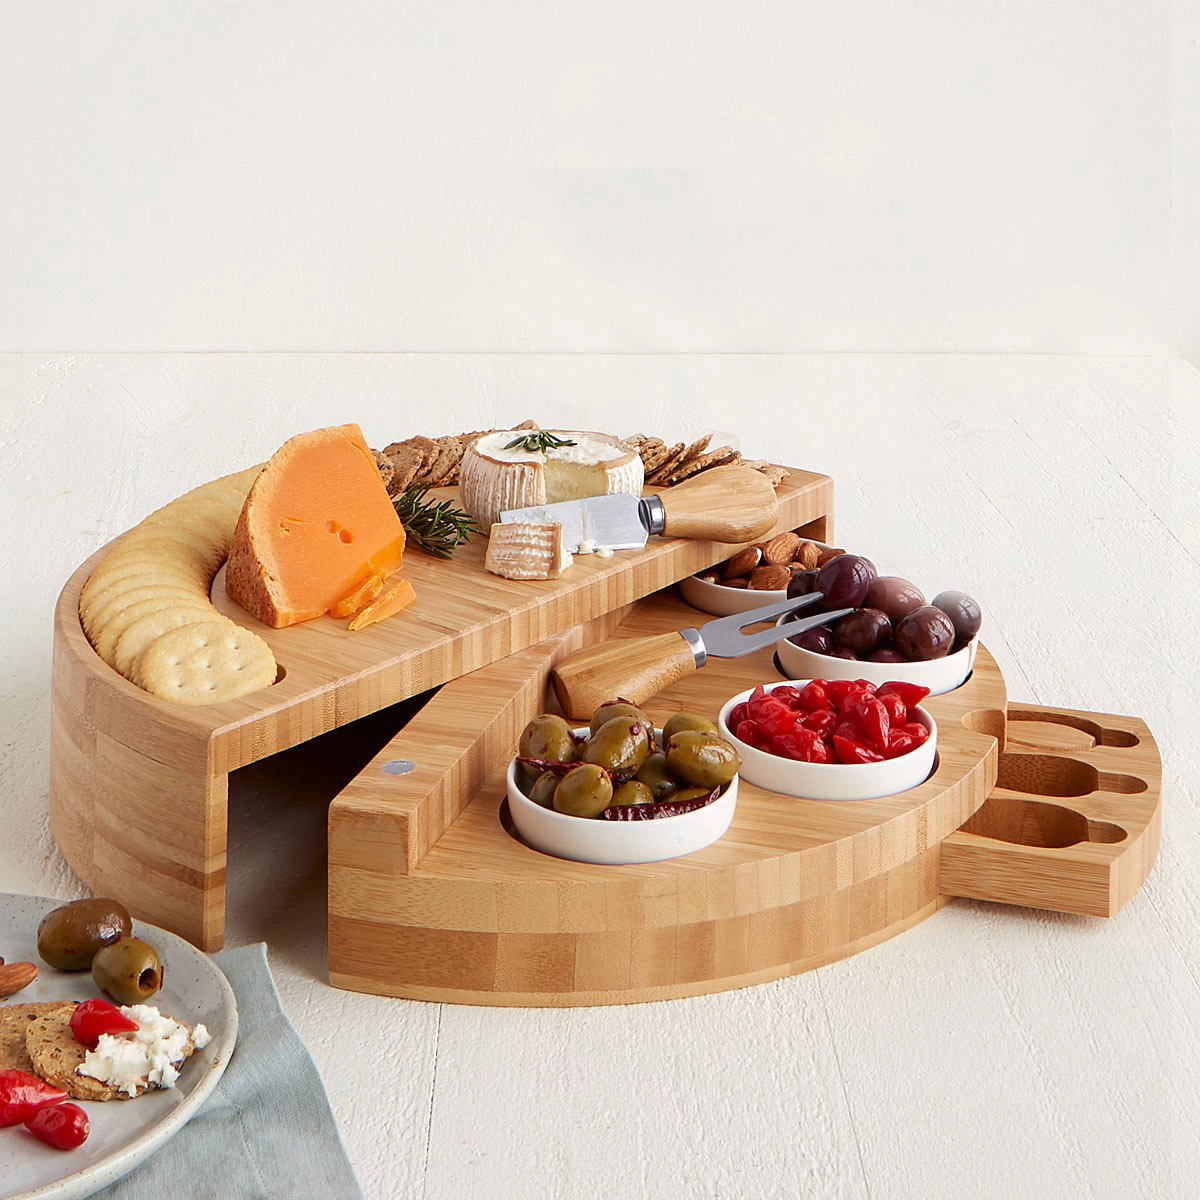 🔥Walmart【Limited Time Offer】🔥Swiveling Cheese Board🎁BUY 1 GET 1 FREE🎁